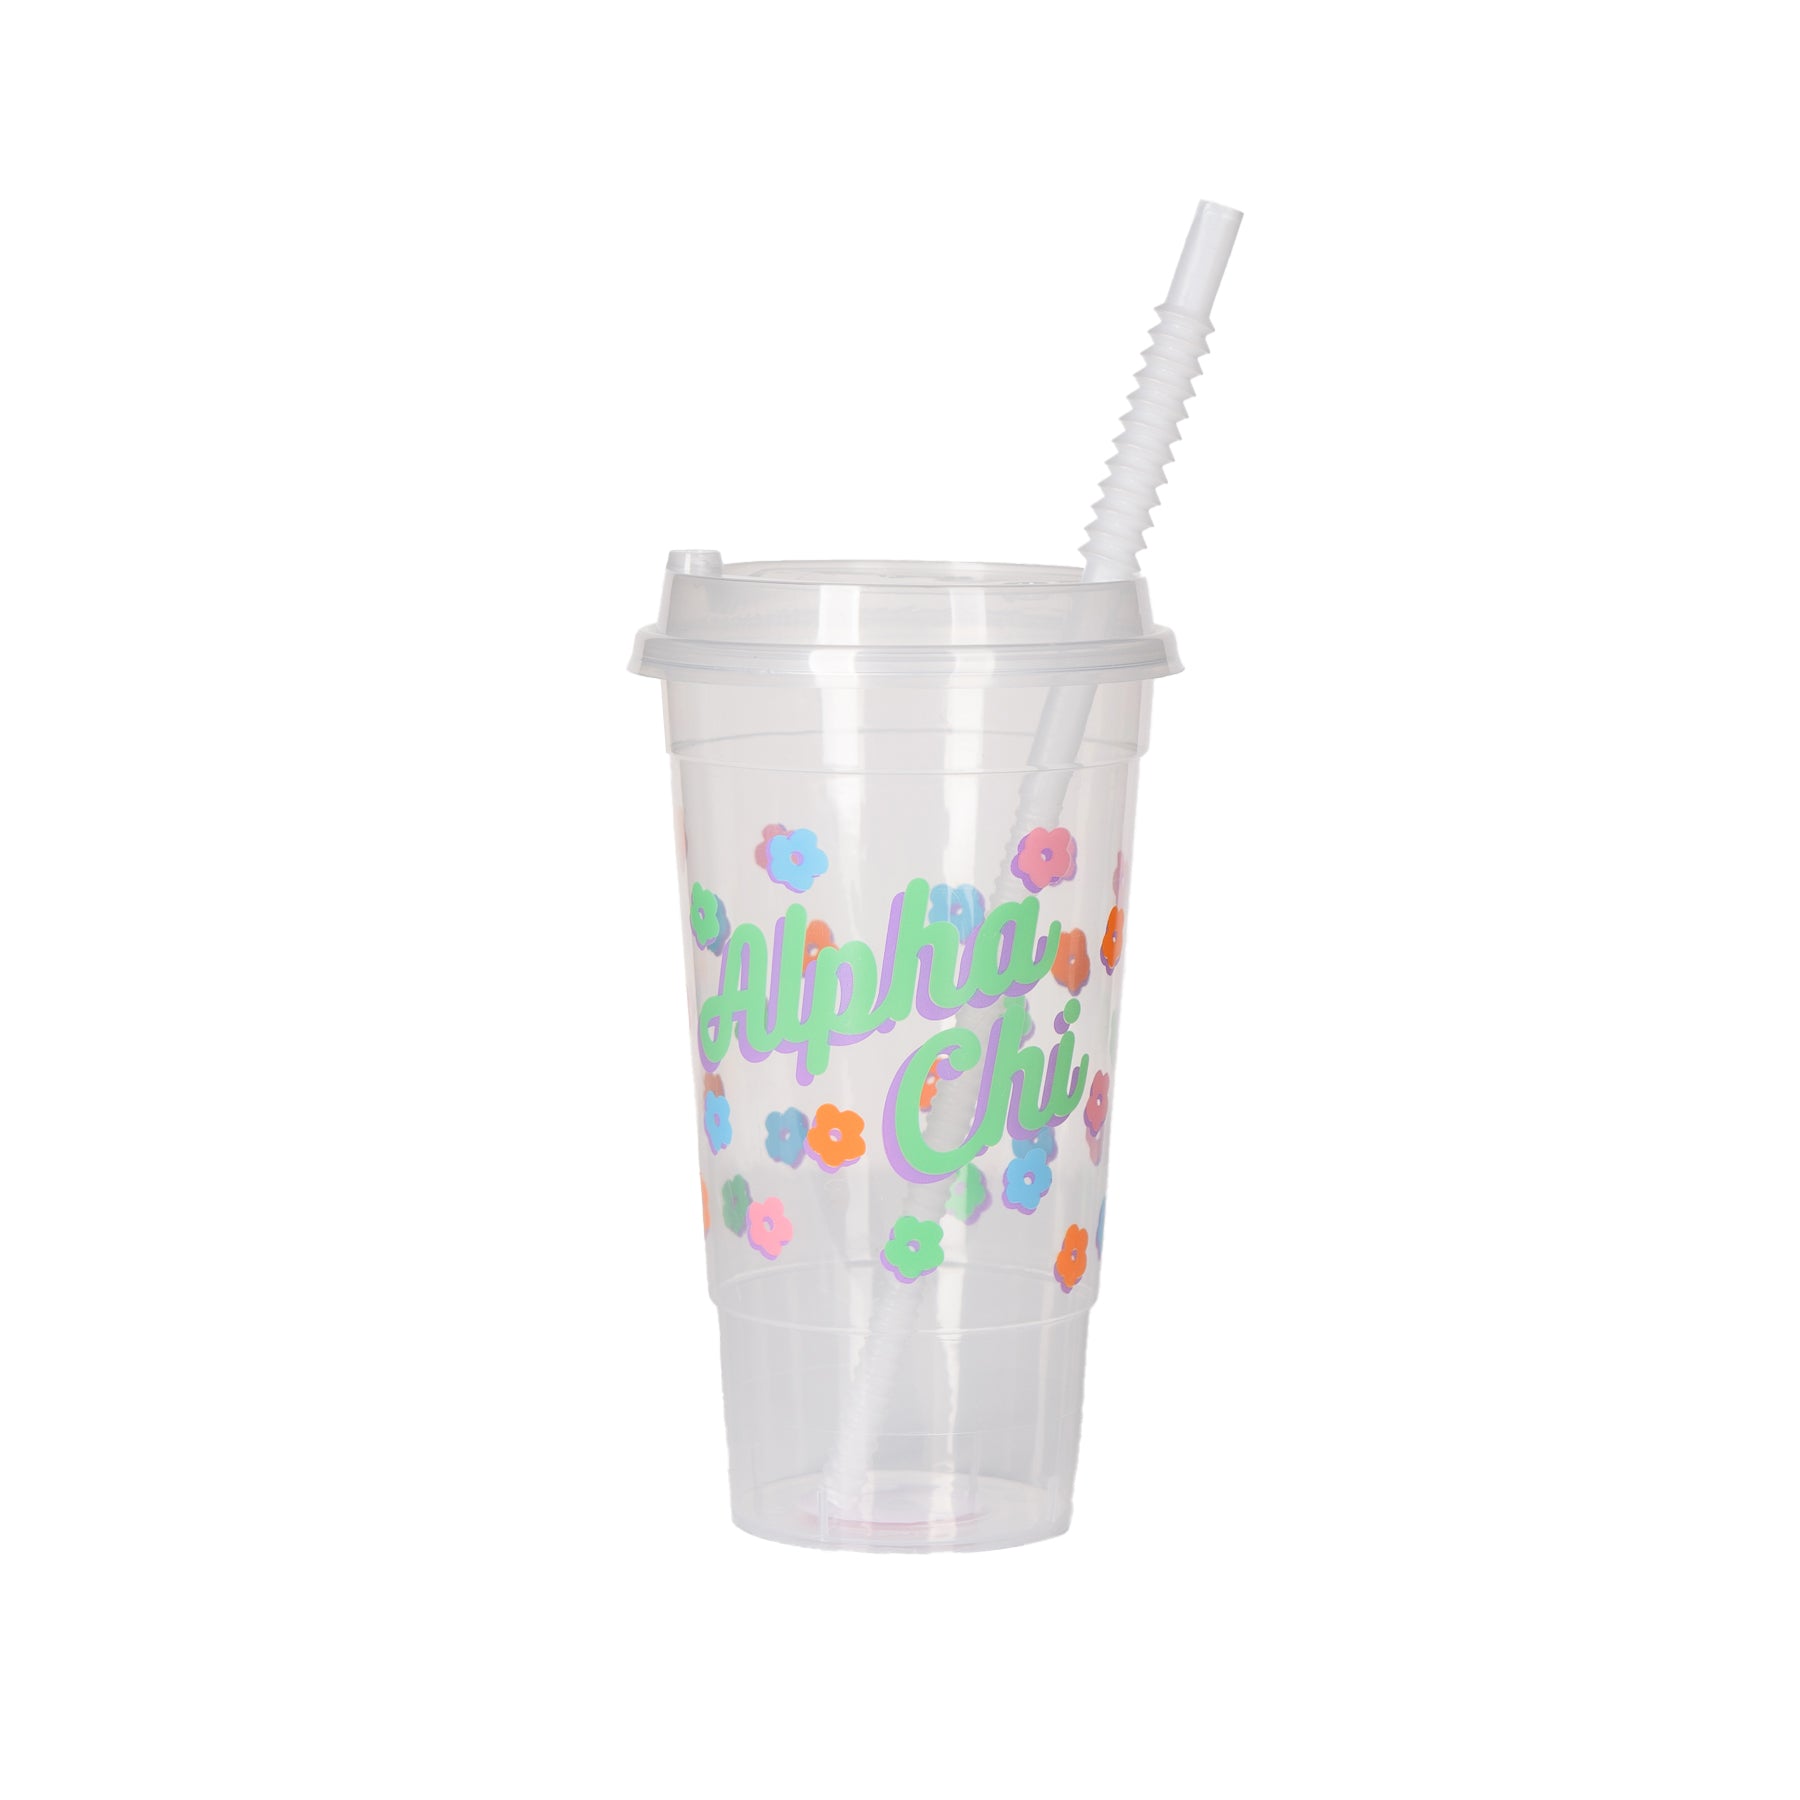 Alpha Chi FLOWER CHILD Clear Cup